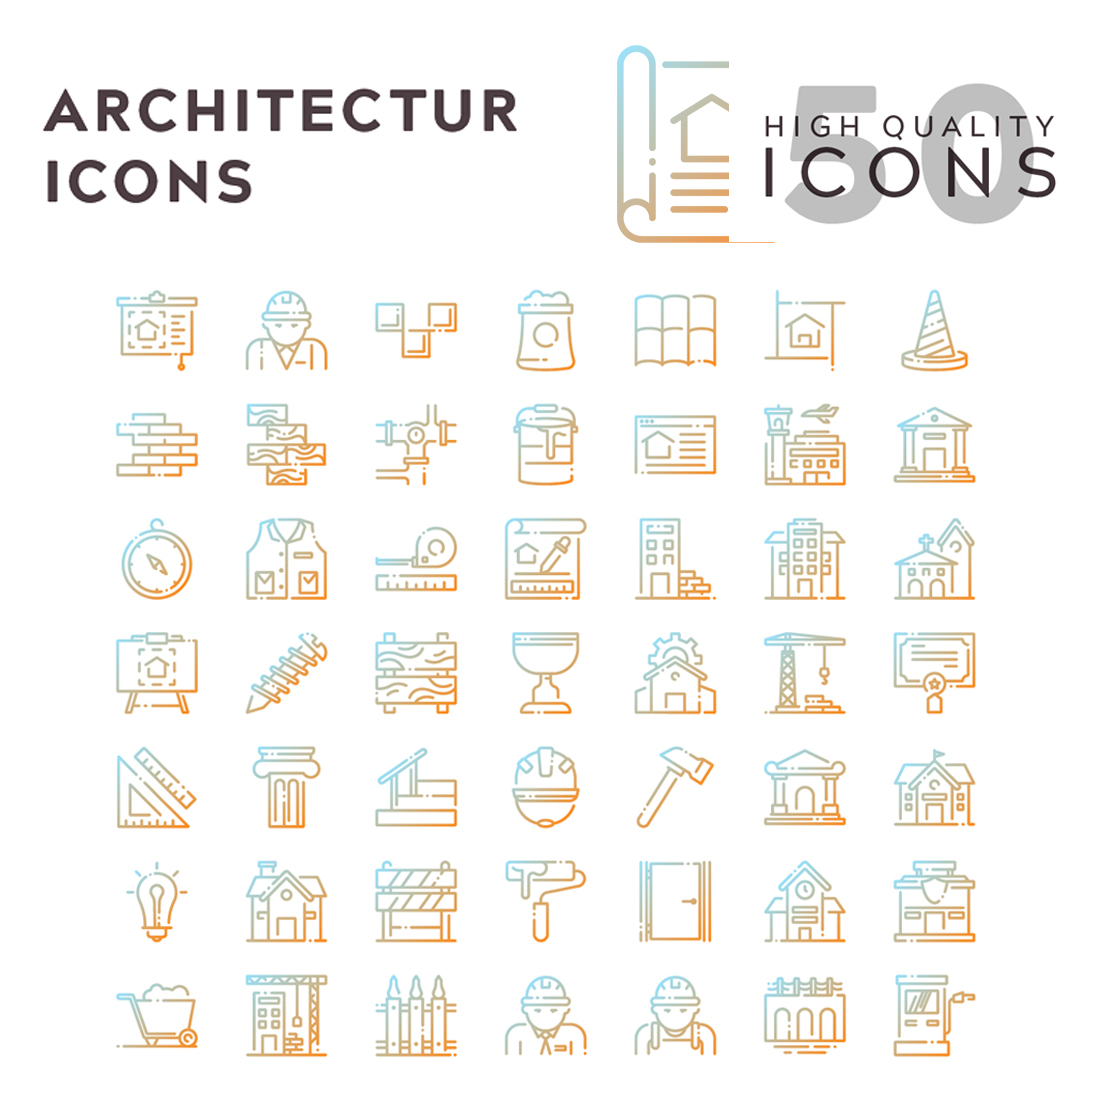 Architecture Icons Graphics cover image.